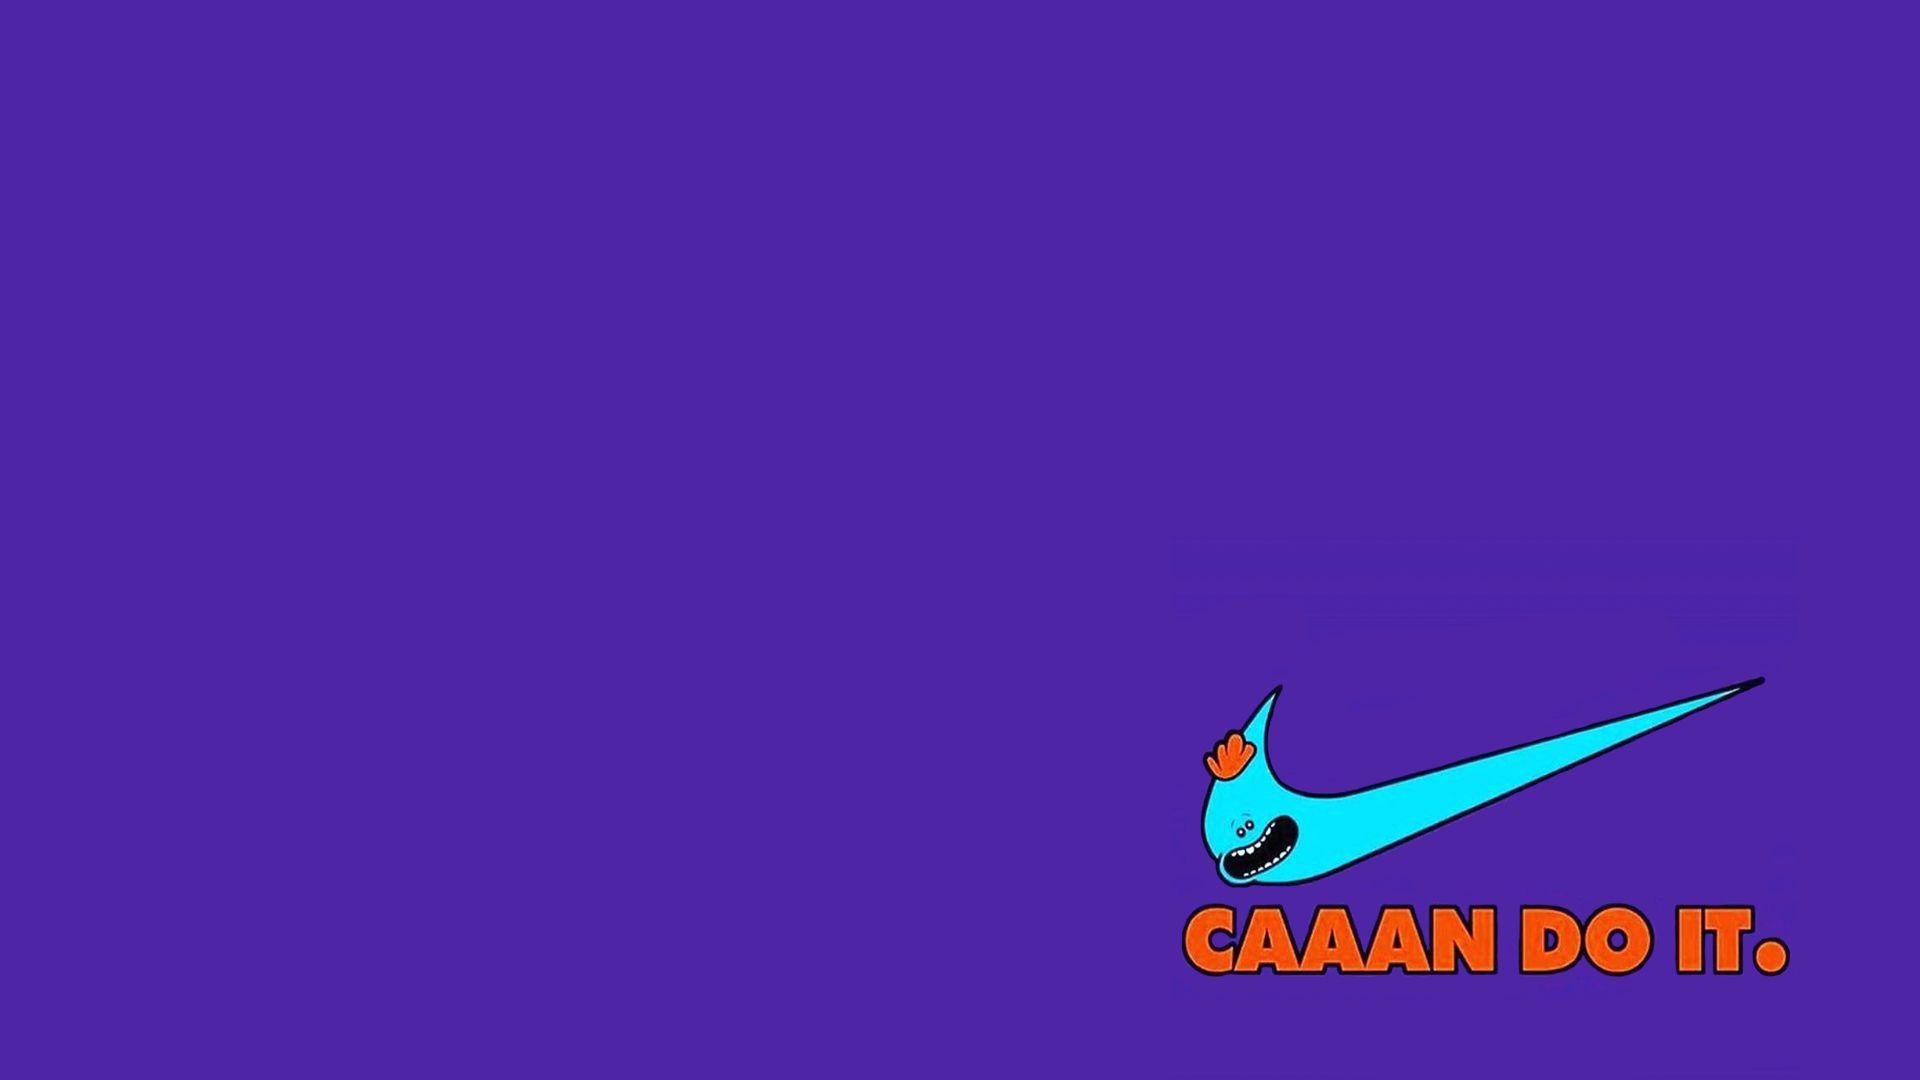 Made this 1080p wallpaper with this Nike Meeseeks that popped up